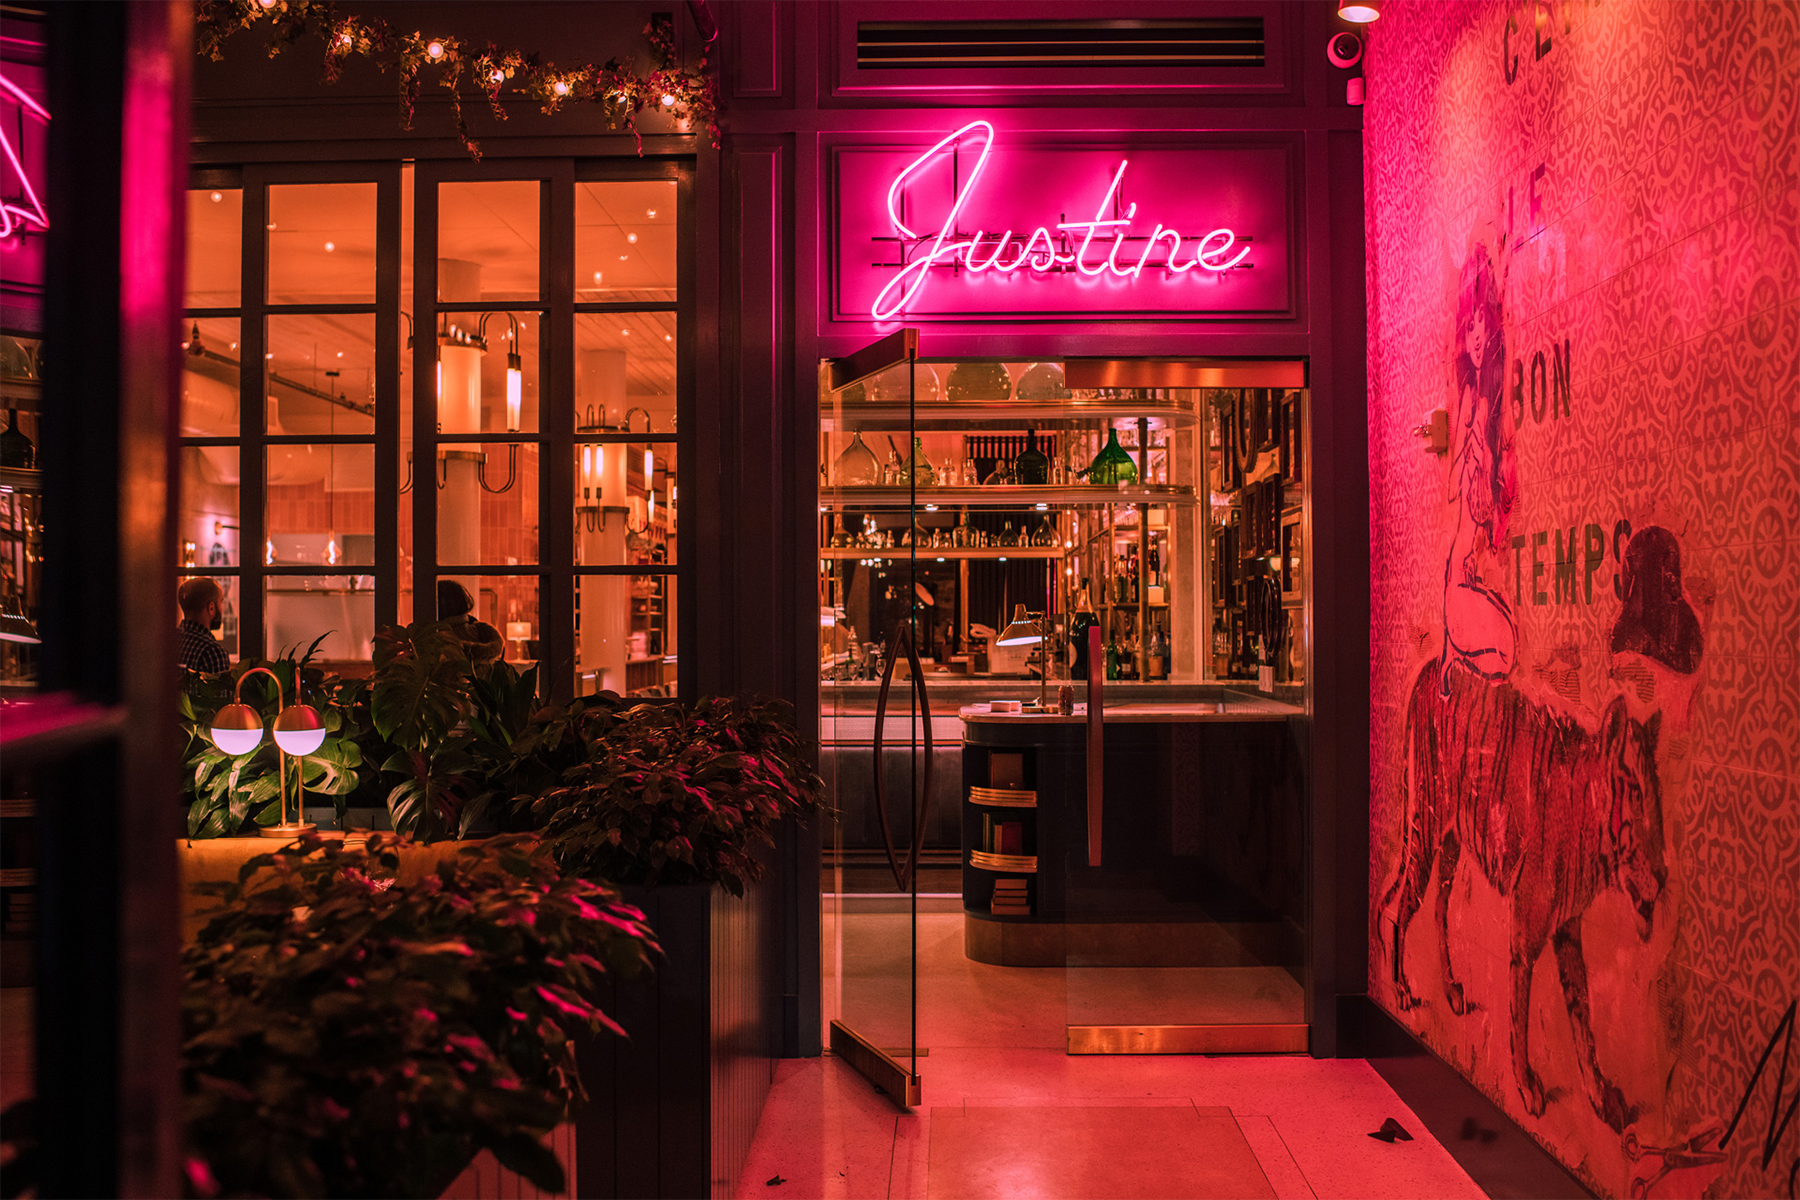 The Made Shop Creates Identity for New Orleans’ Restaurant “Justine”